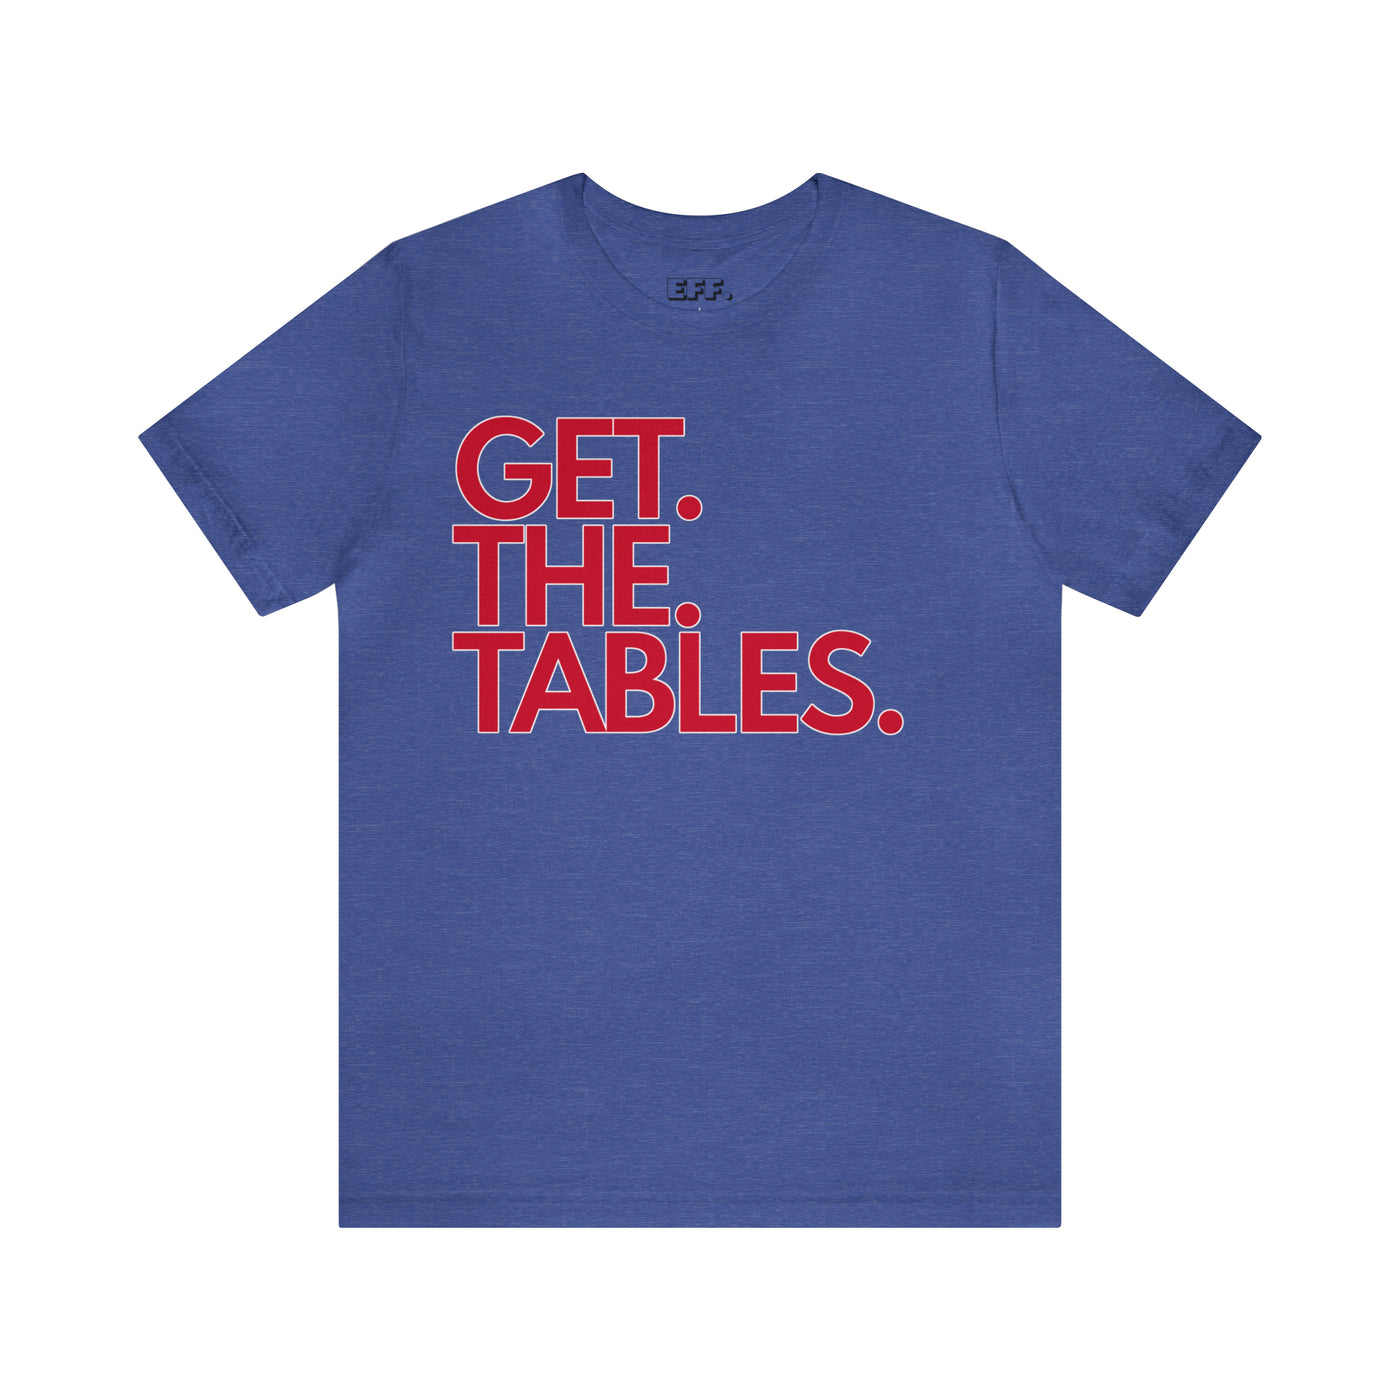 Get. The. Tables.